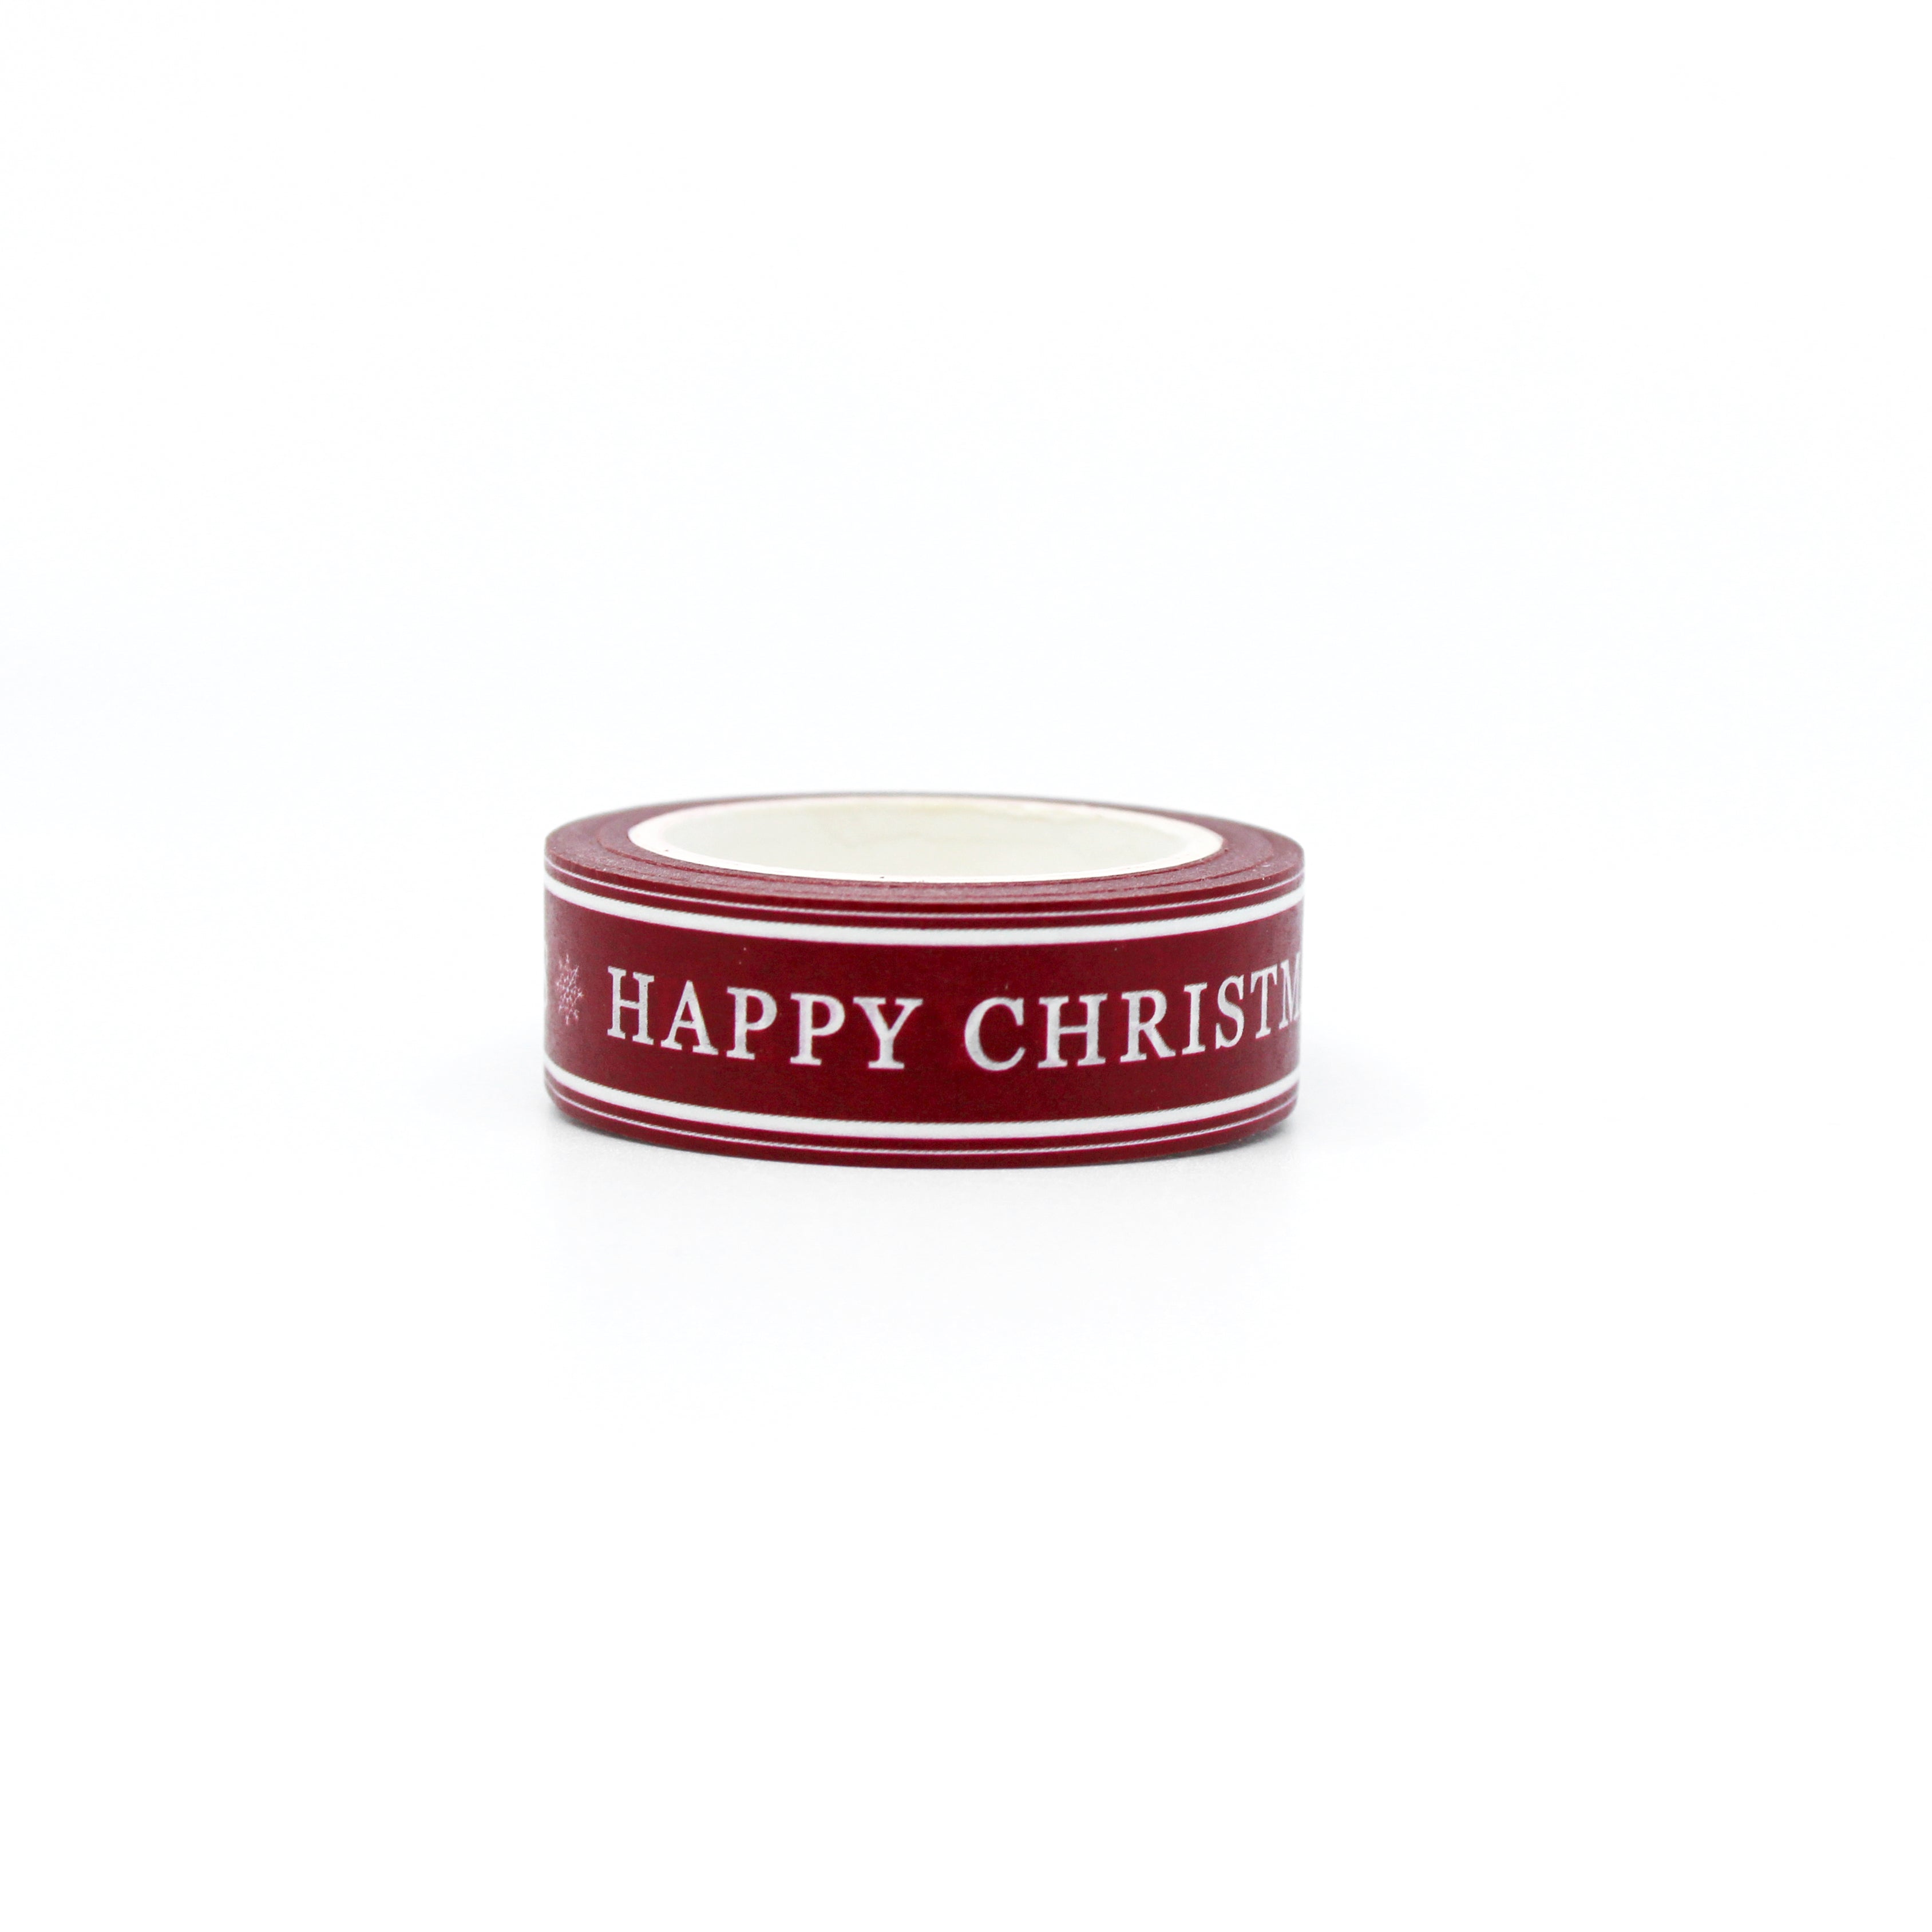 This is a wonderful phrases for Christmas washi tape from BBB Supplies Craft Shop